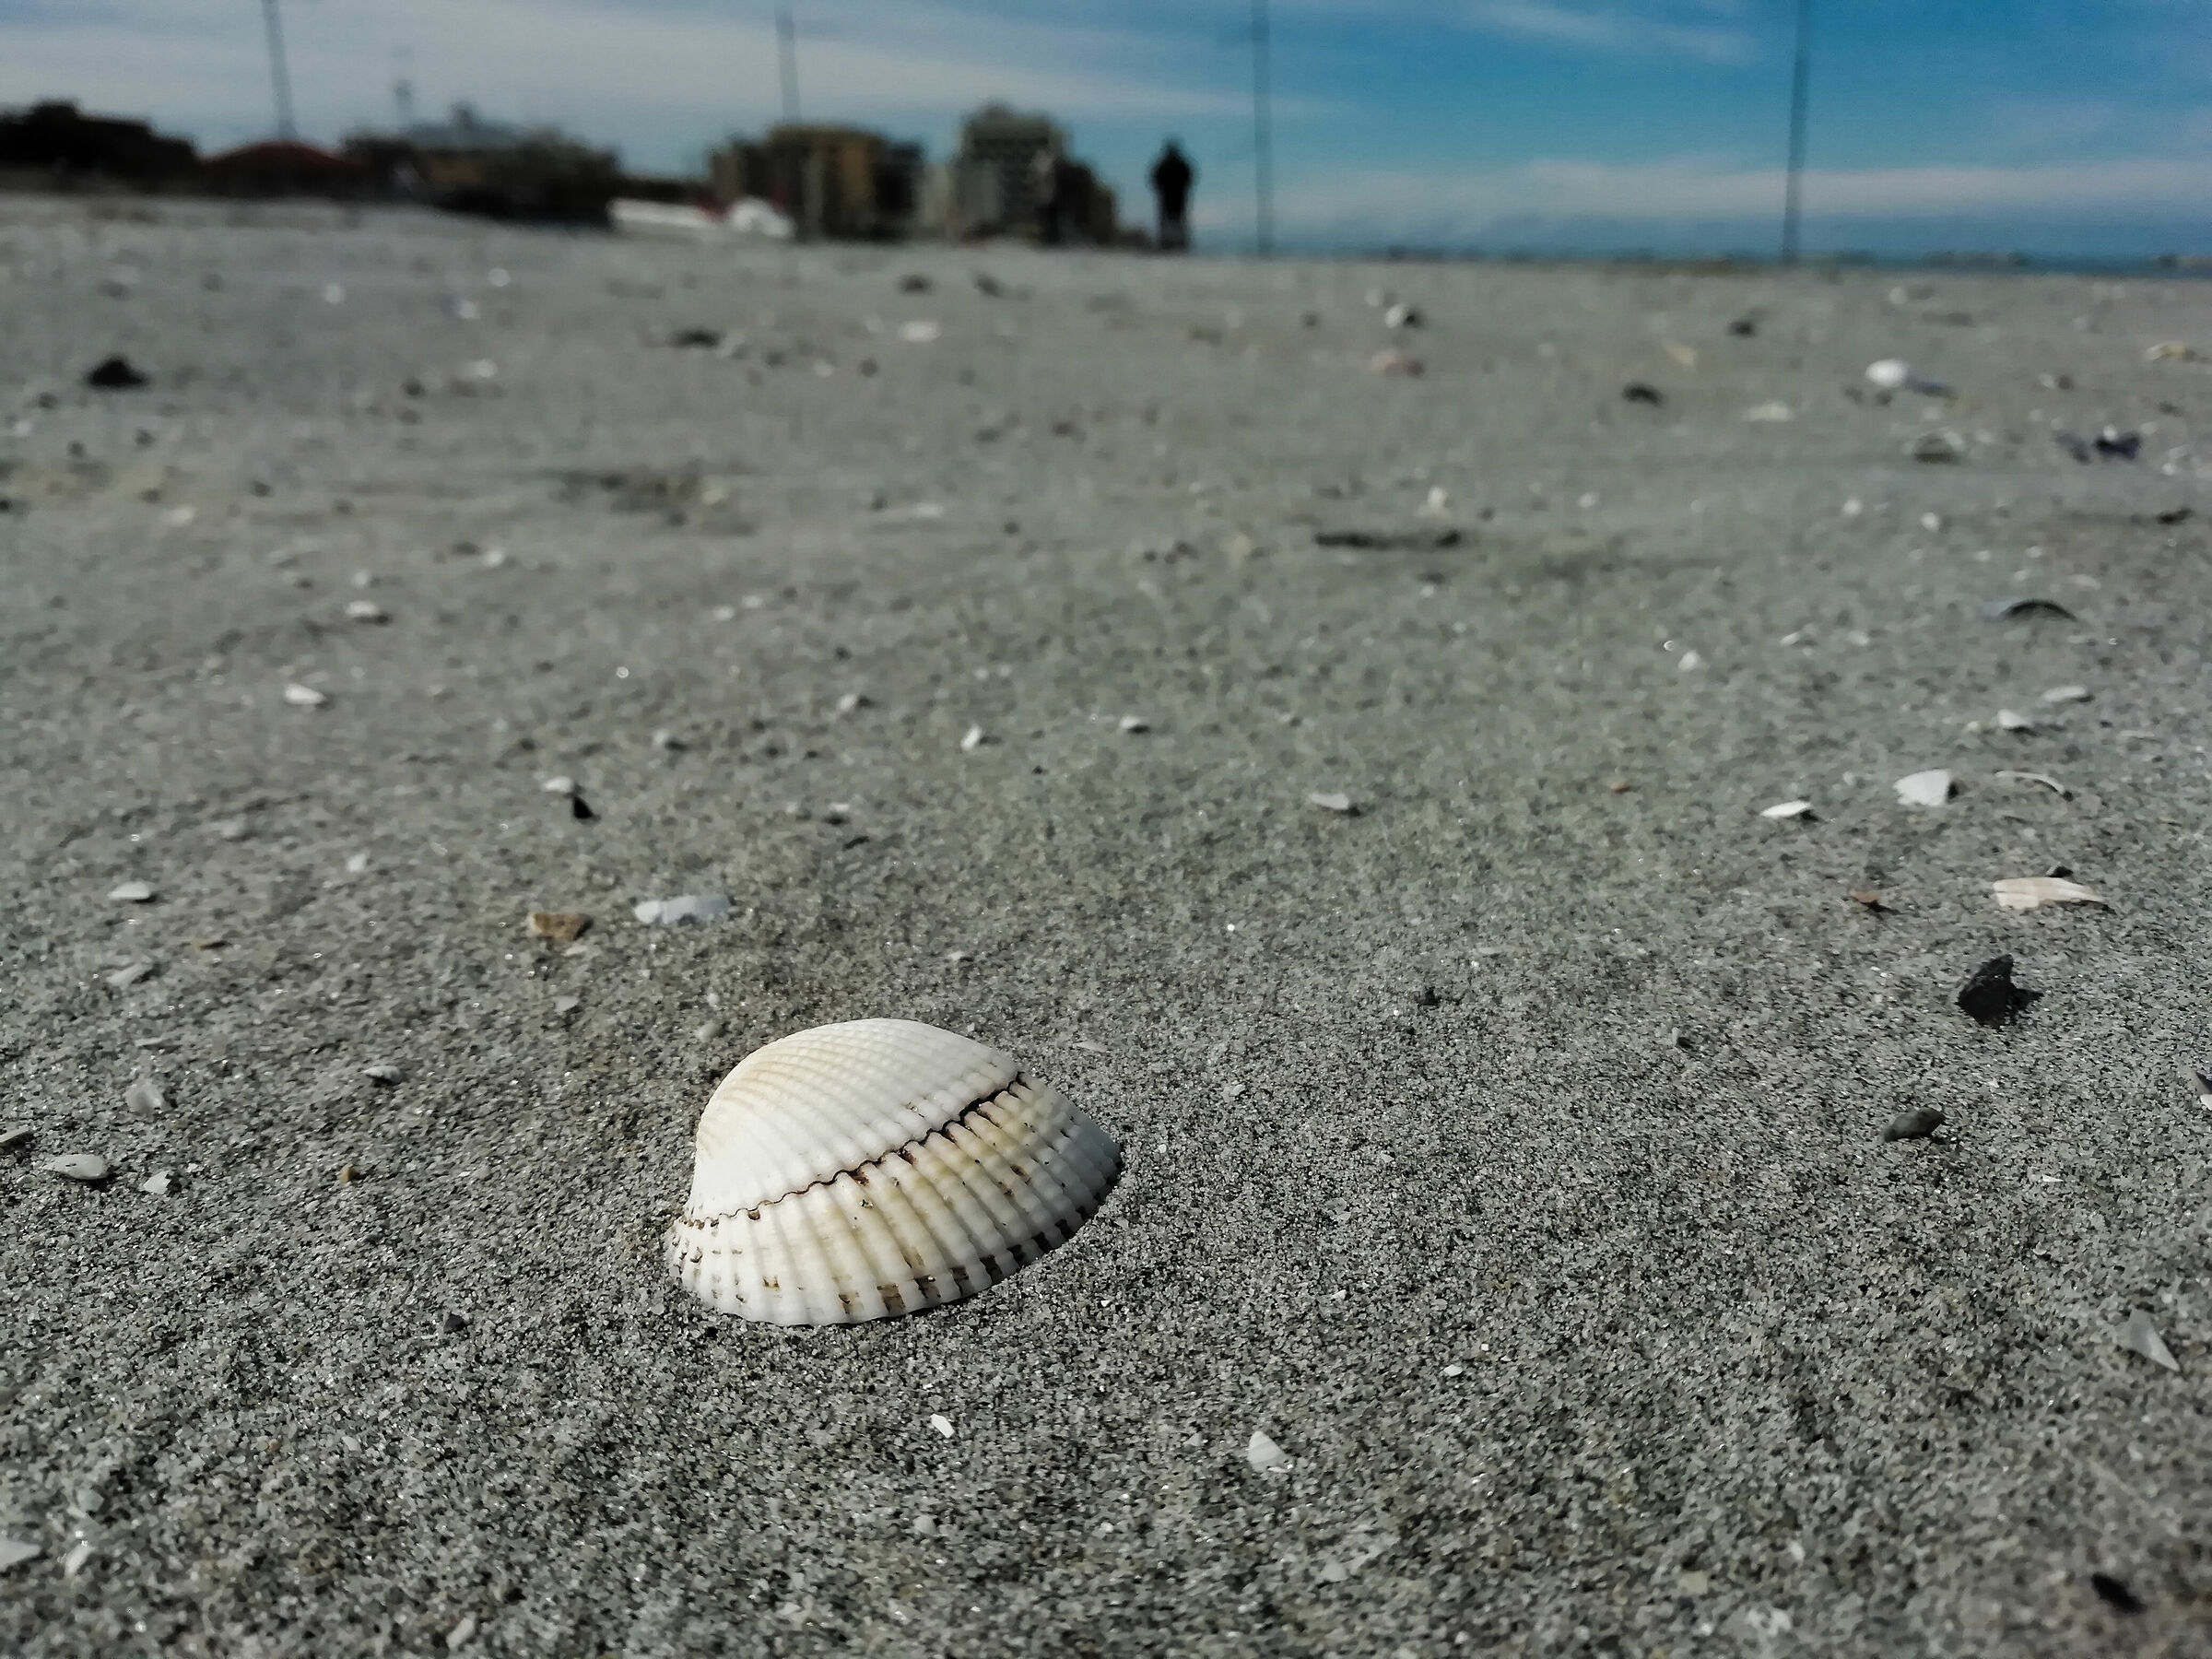 Shells and remains...